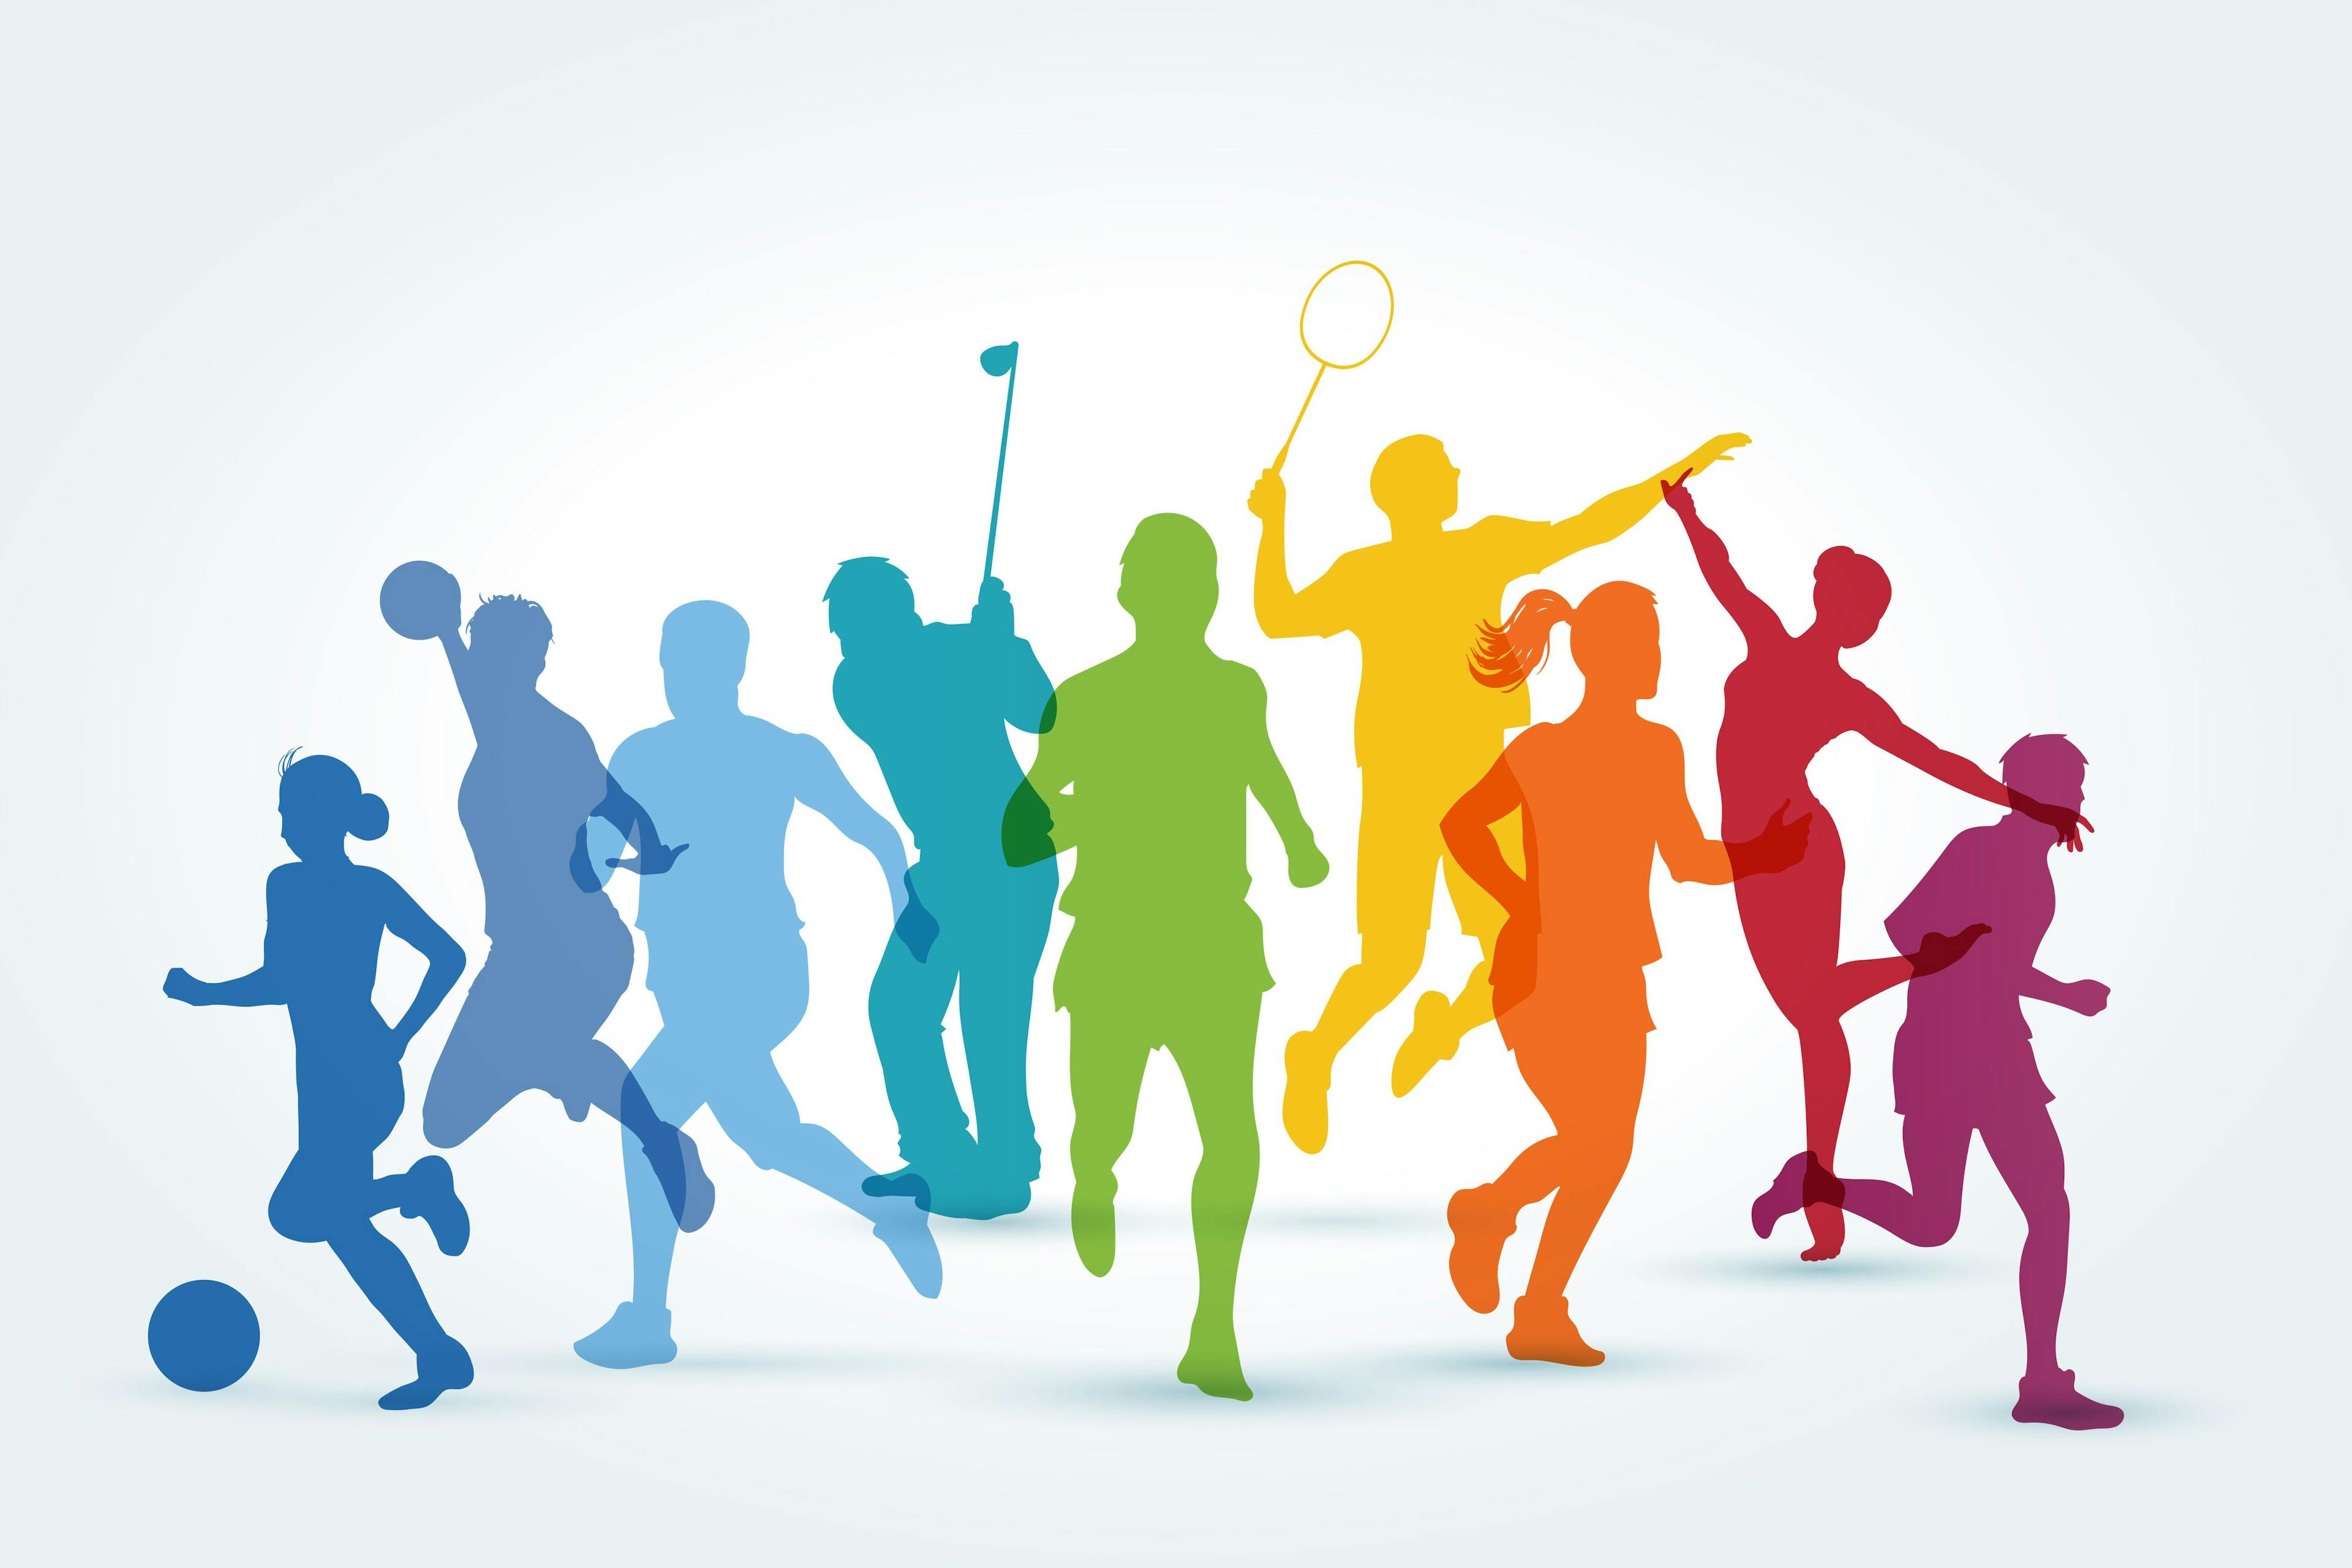 athletes in different colors playing sports